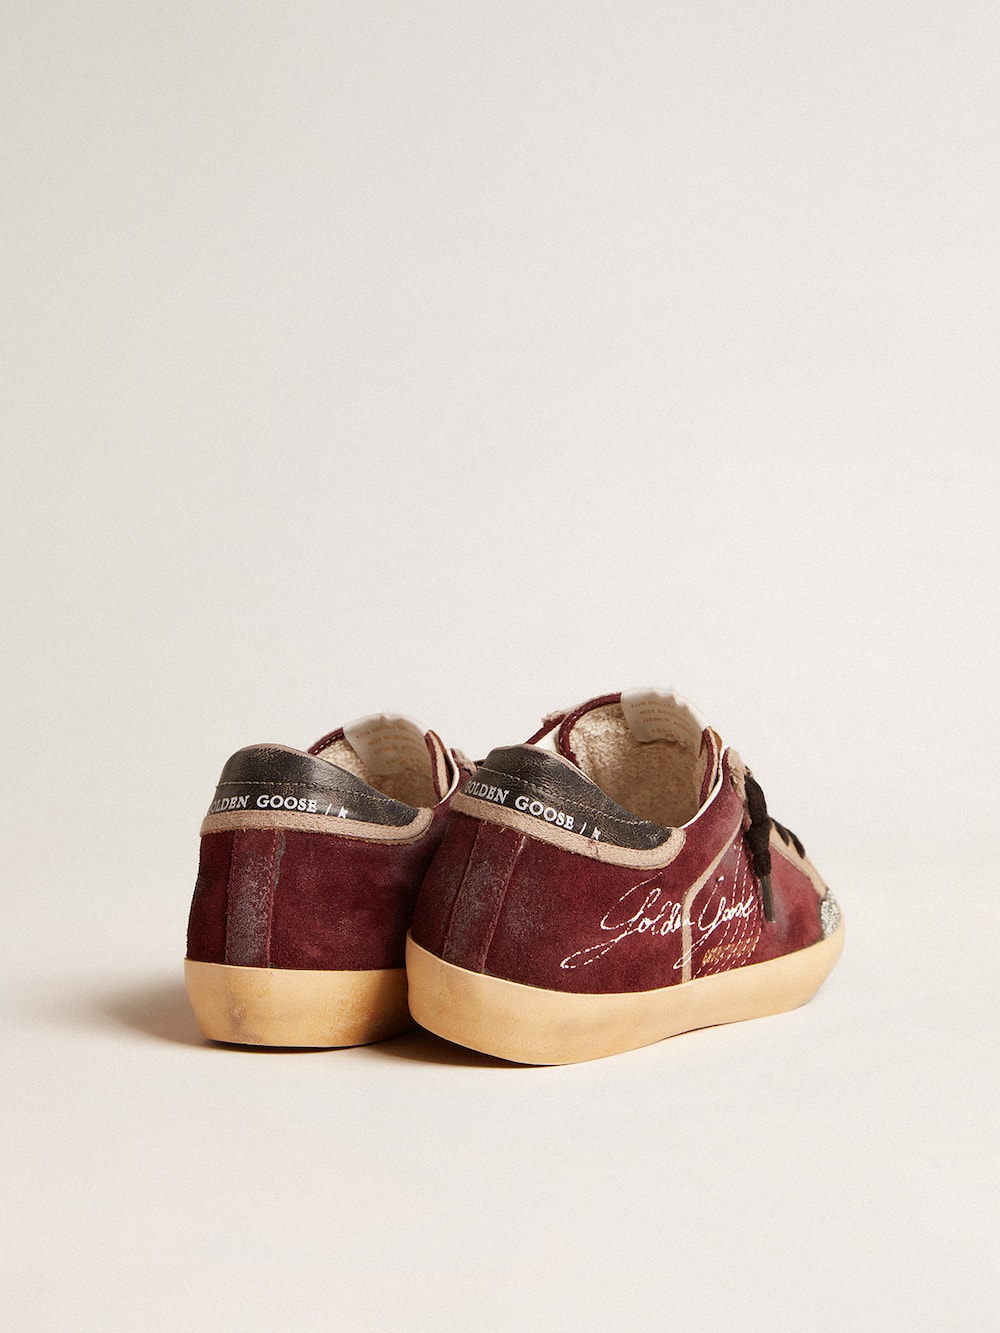 Golden Goose - Women’s Super-Star Penstar LAB in burgundy suede with perforated star in 